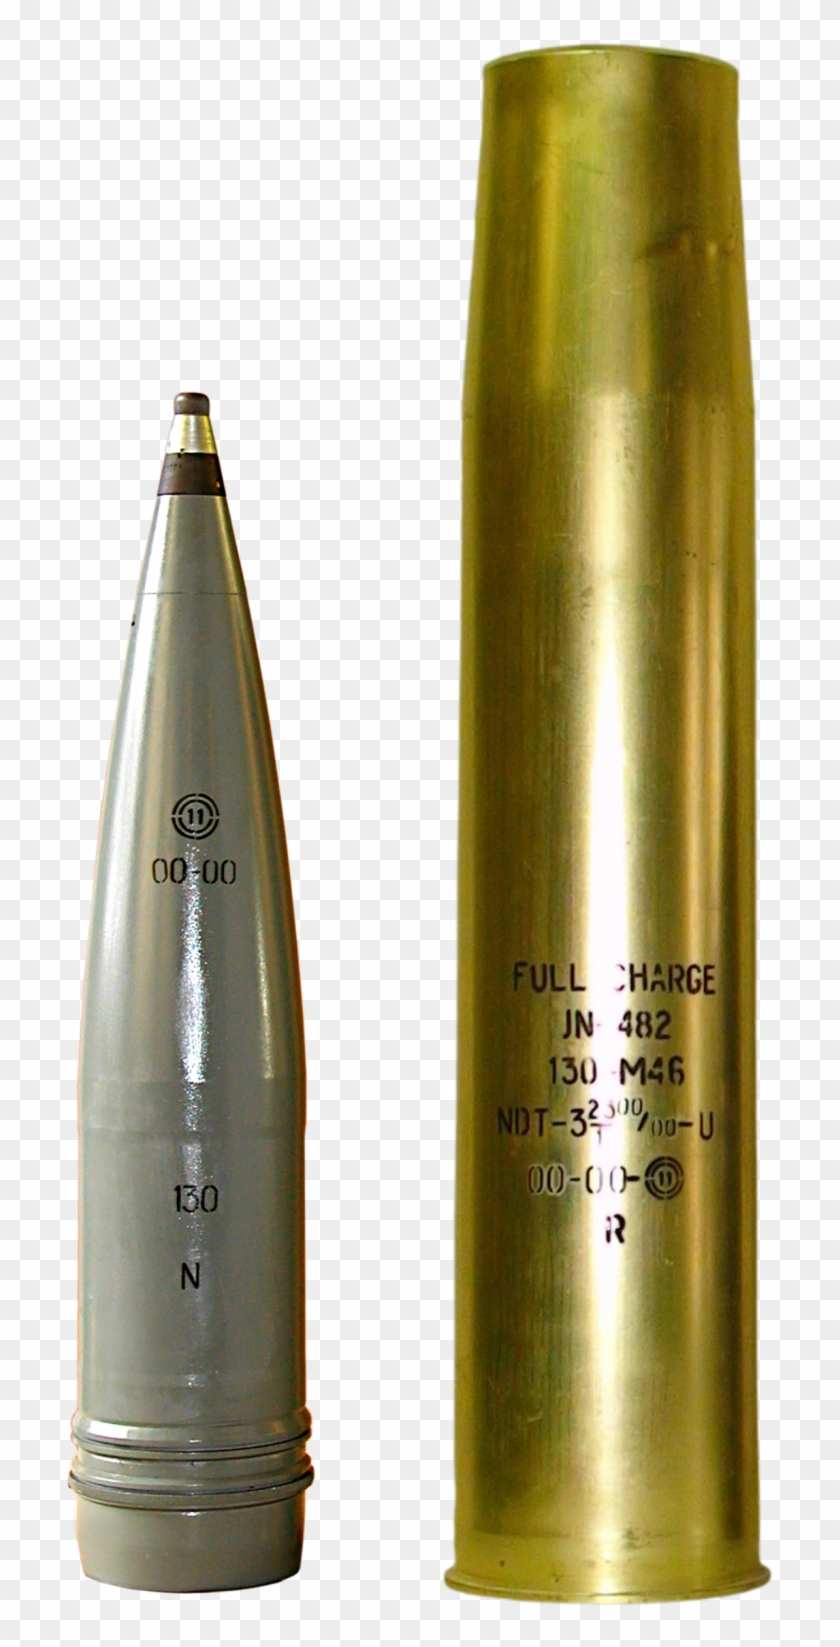 The 130 Mm Round With A He-frag Projectile Is A Separate - Cosmetics Clipart #3885993